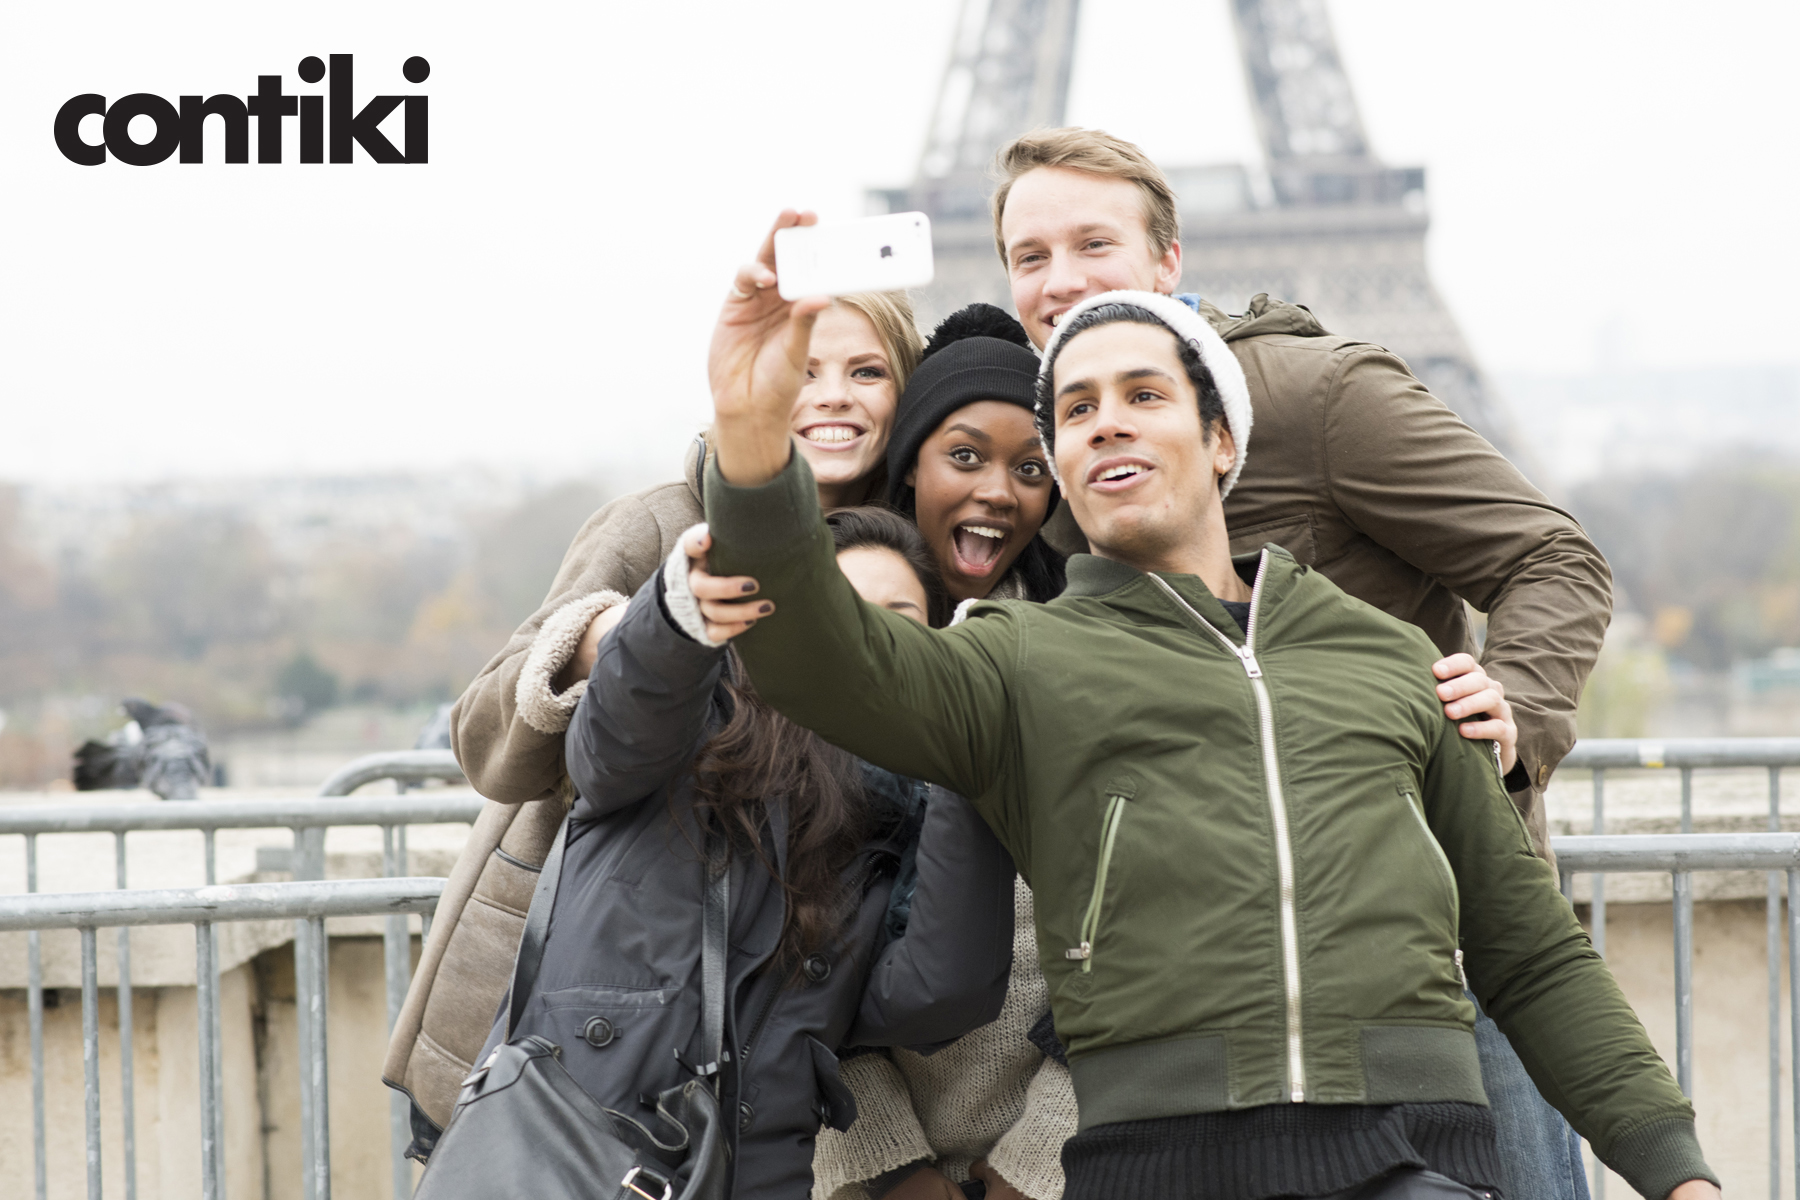 Contiki Enables Young People to Travel the World Affordably